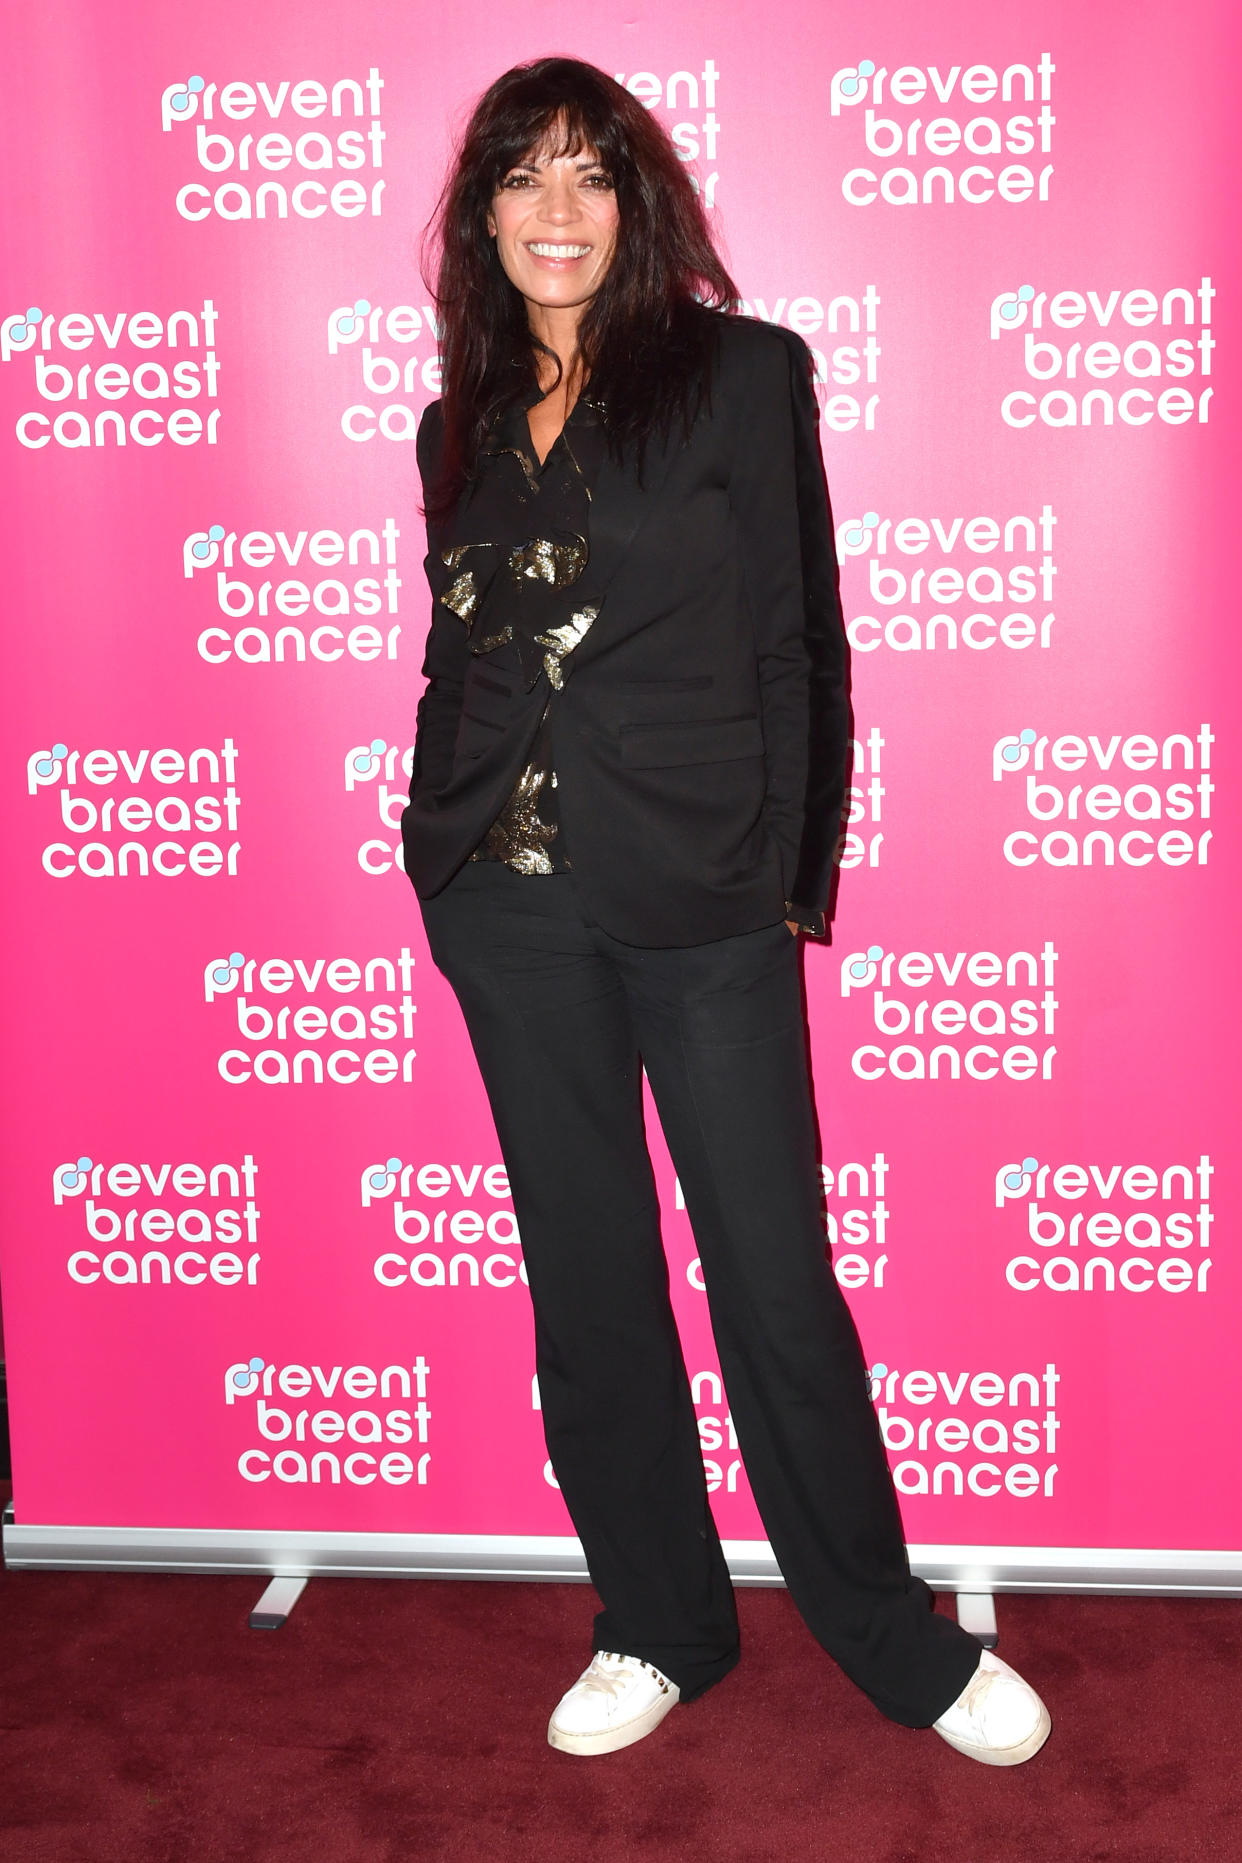 Jenny Powell attends the Cheshire Premiere of 